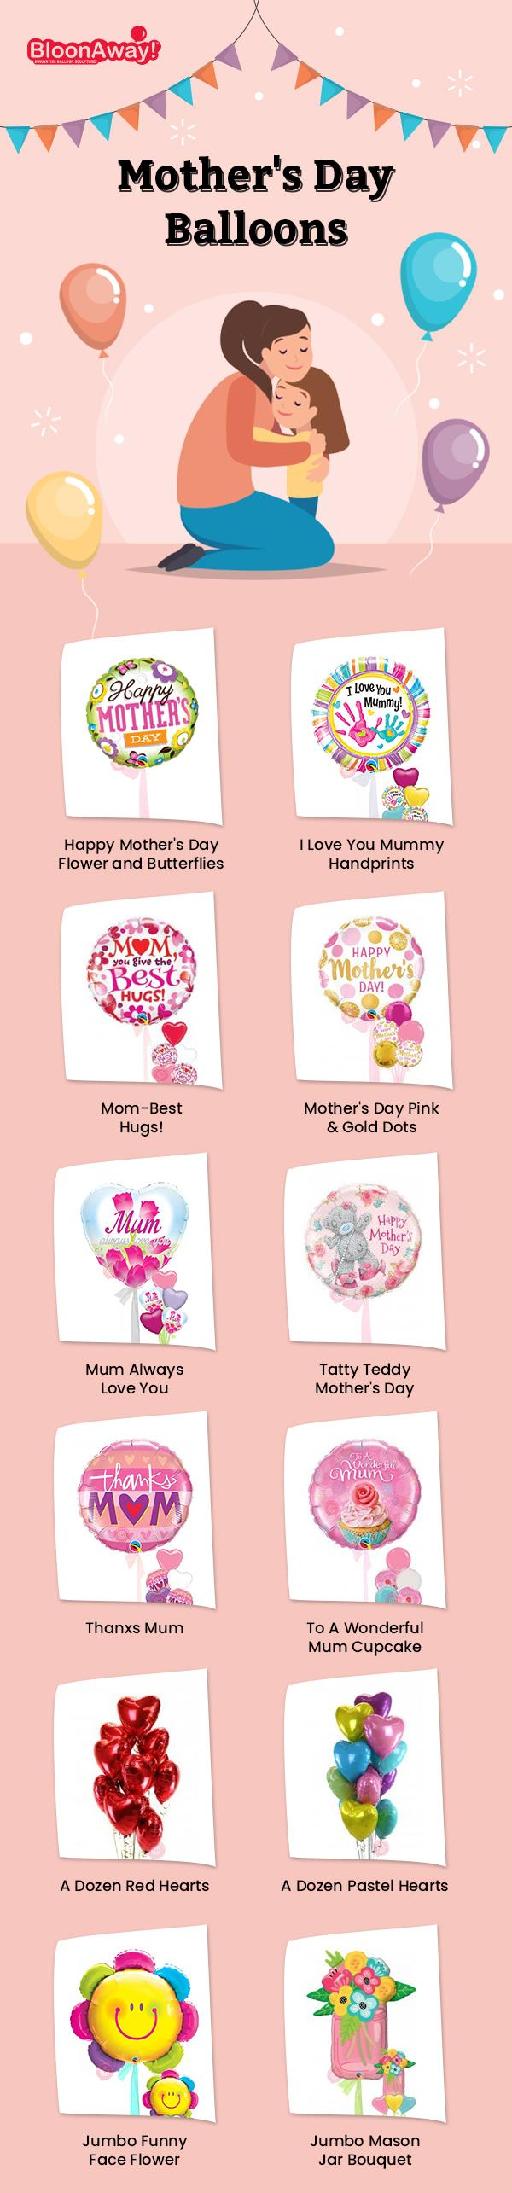 Buy Ready to Surprise Helium Mothers Day Balloons